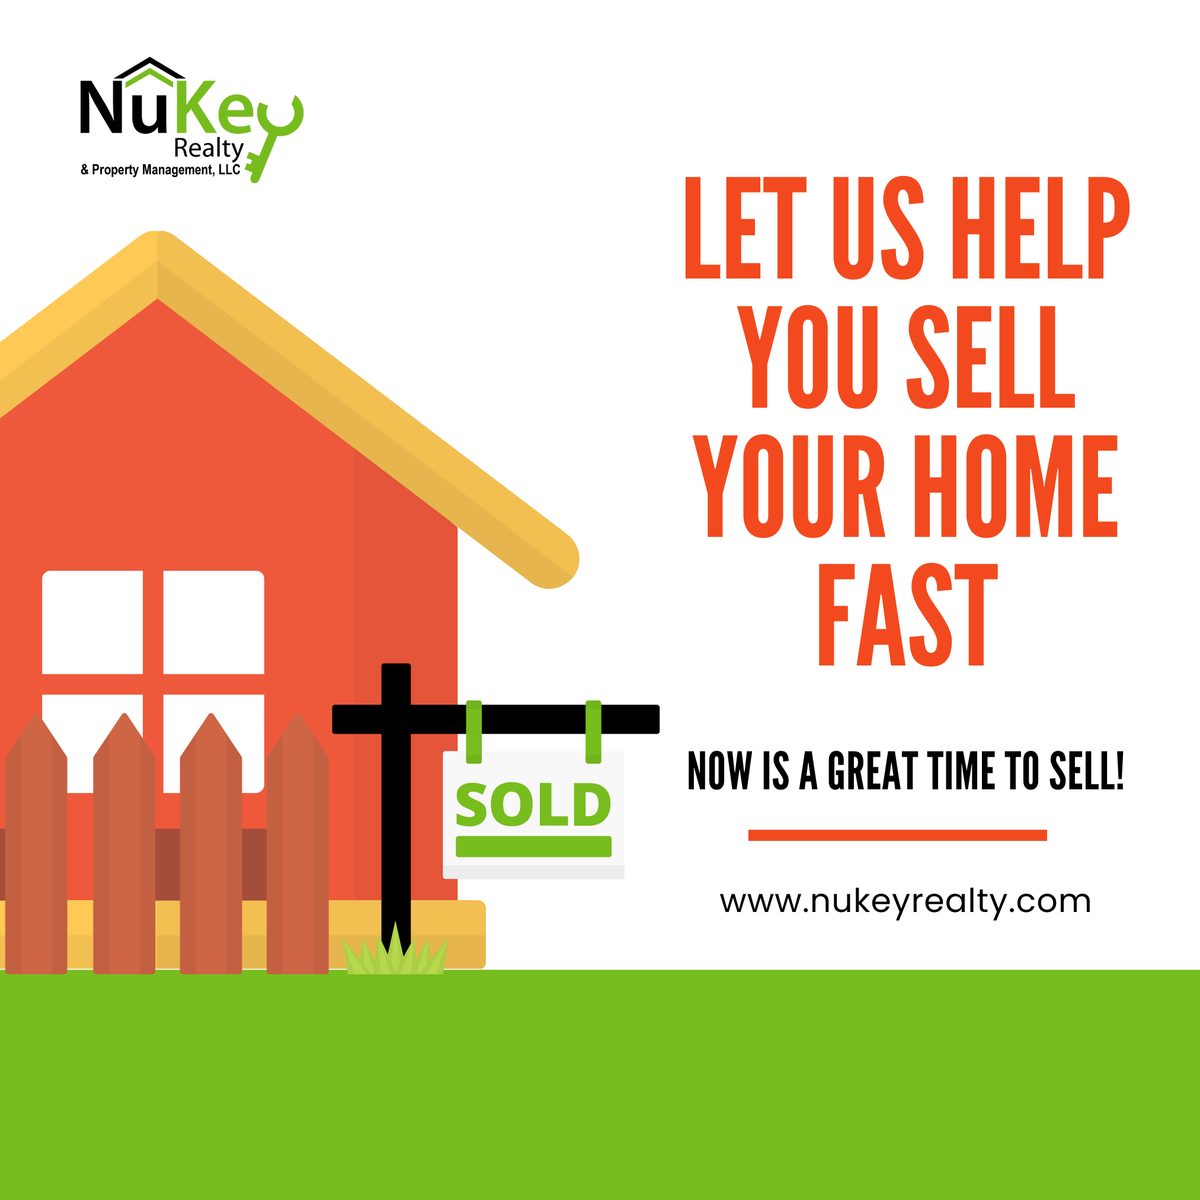 🏡 Looking to sell your home fast? Let NuKey take the stress out of the process!

Don't wait, contact us today and we'll make selling your home a breeze! 
🌐 ow.ly/WpV950RCtPm
📲 (509) 489-4375

#SpokaneRealEstate #FastSale #SpokaneWA